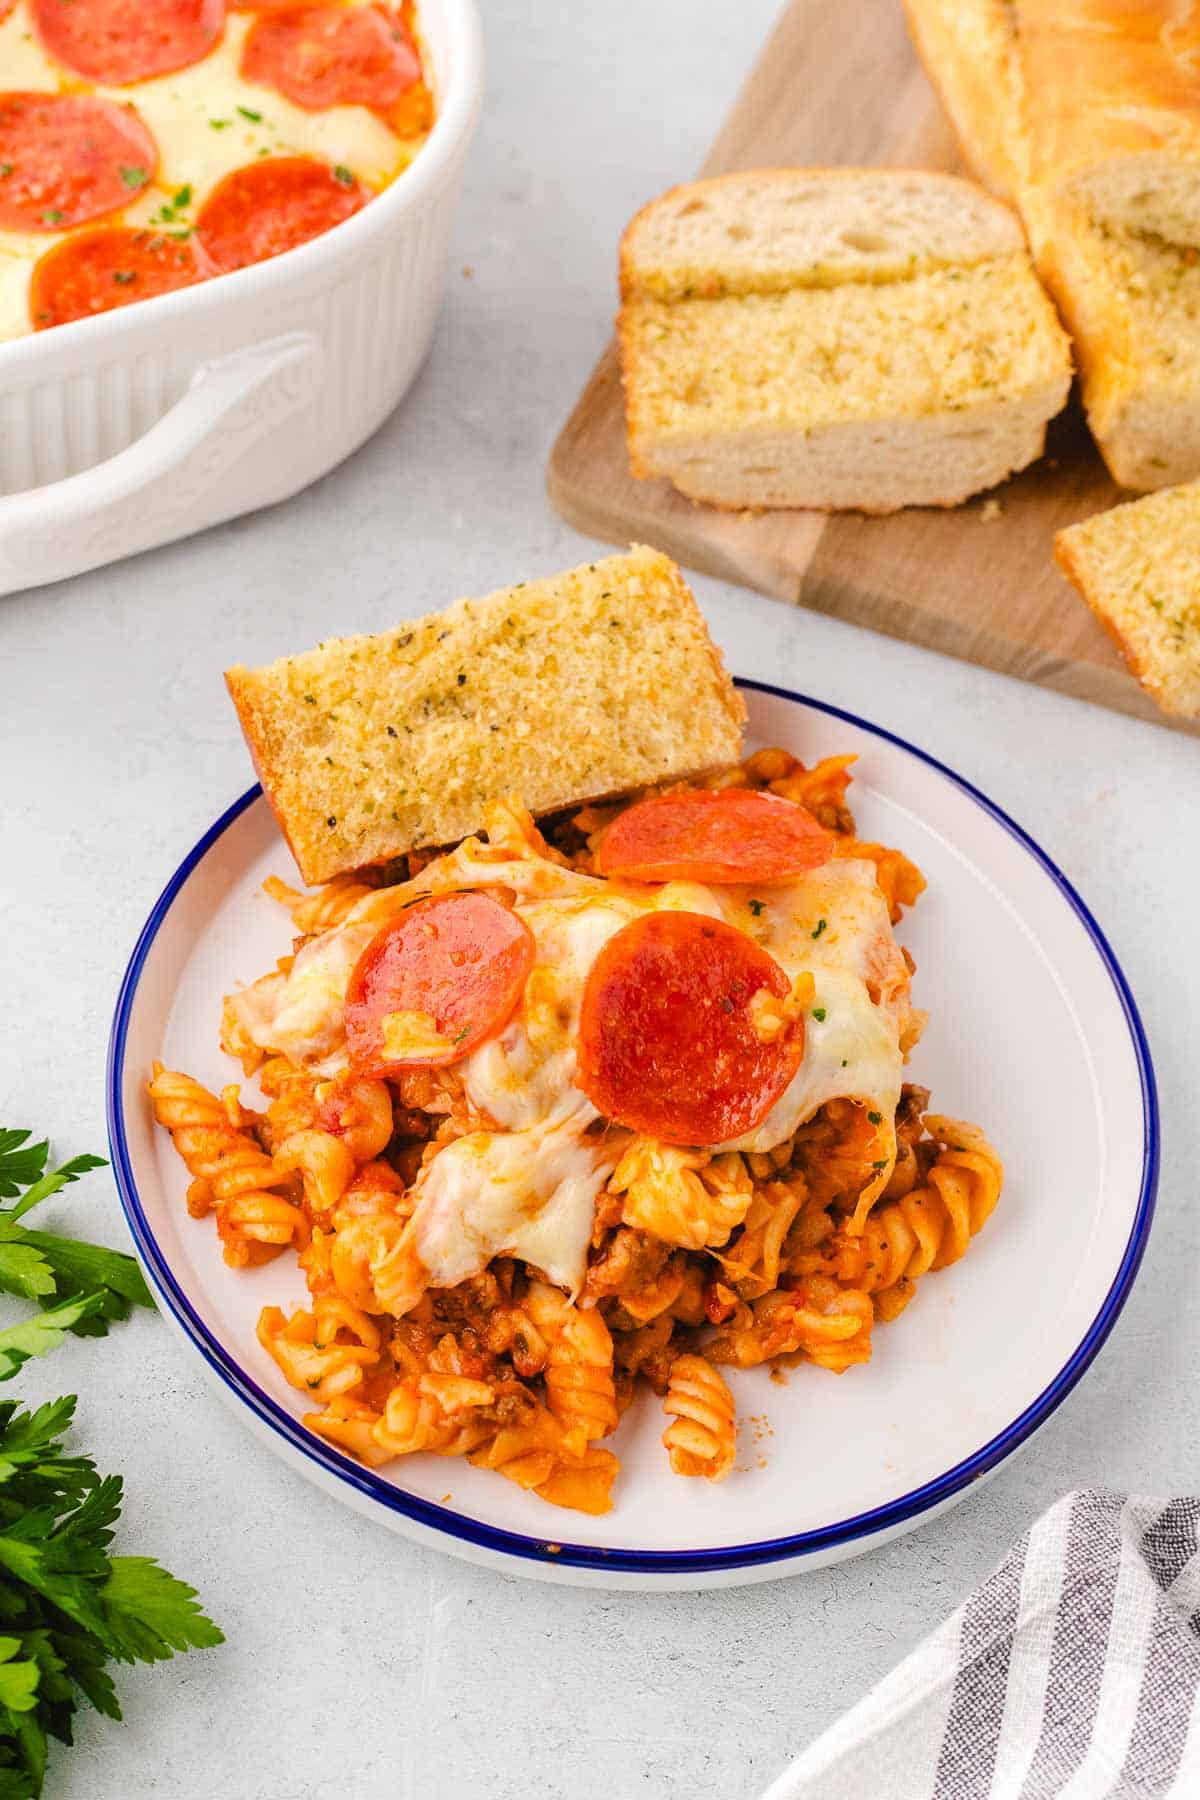 A plate with a serving of pizza pasta bake and a slice of garlic bread.